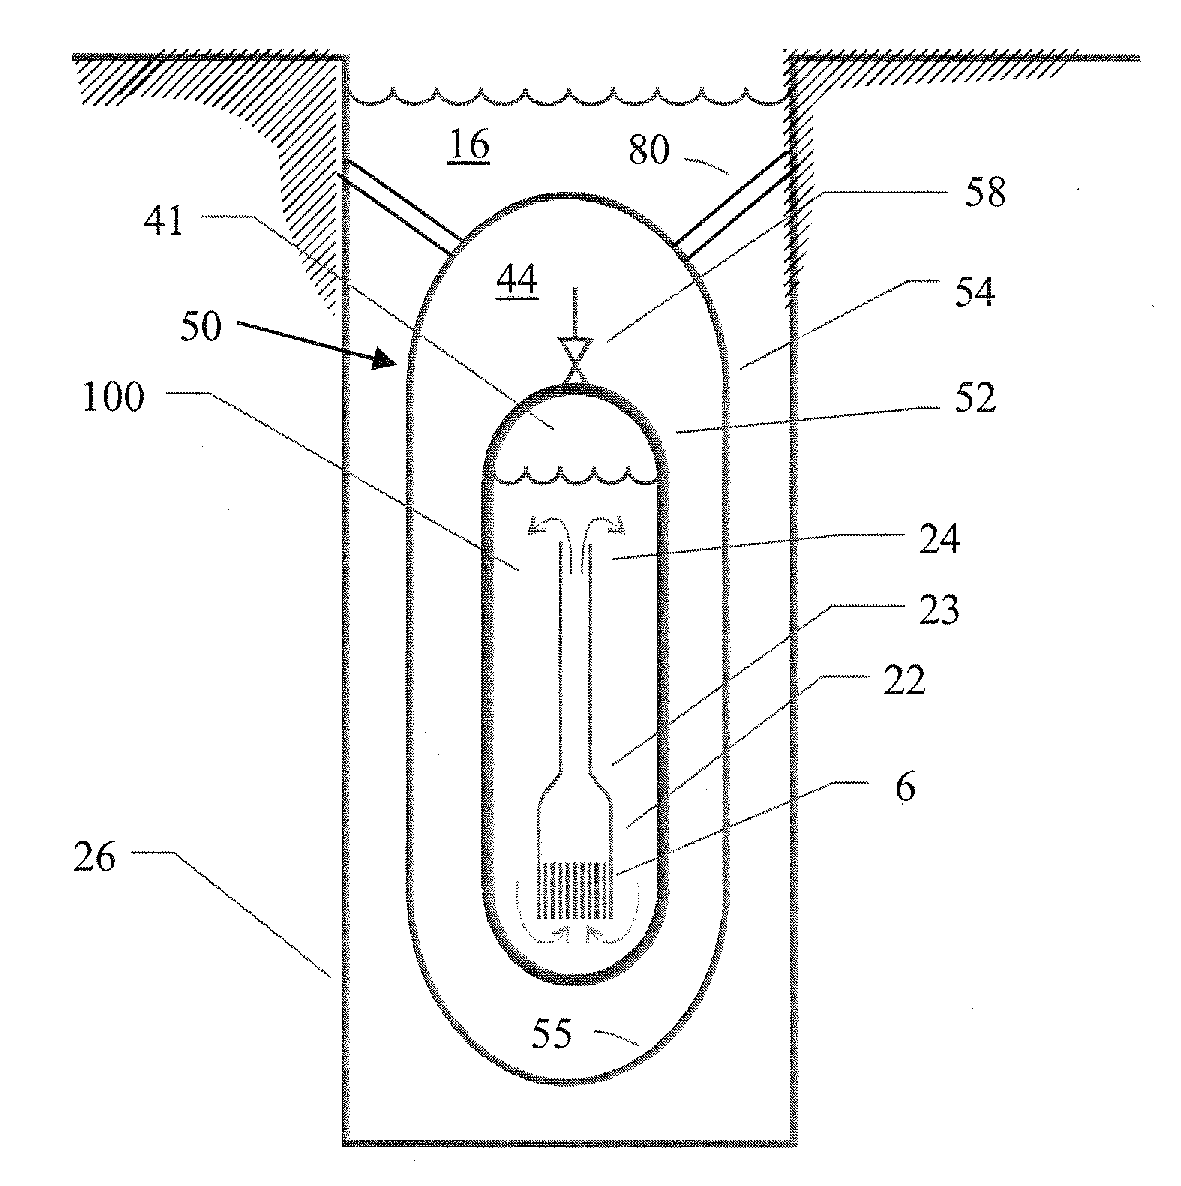 Submerged containment vessel for a nuclear reactor